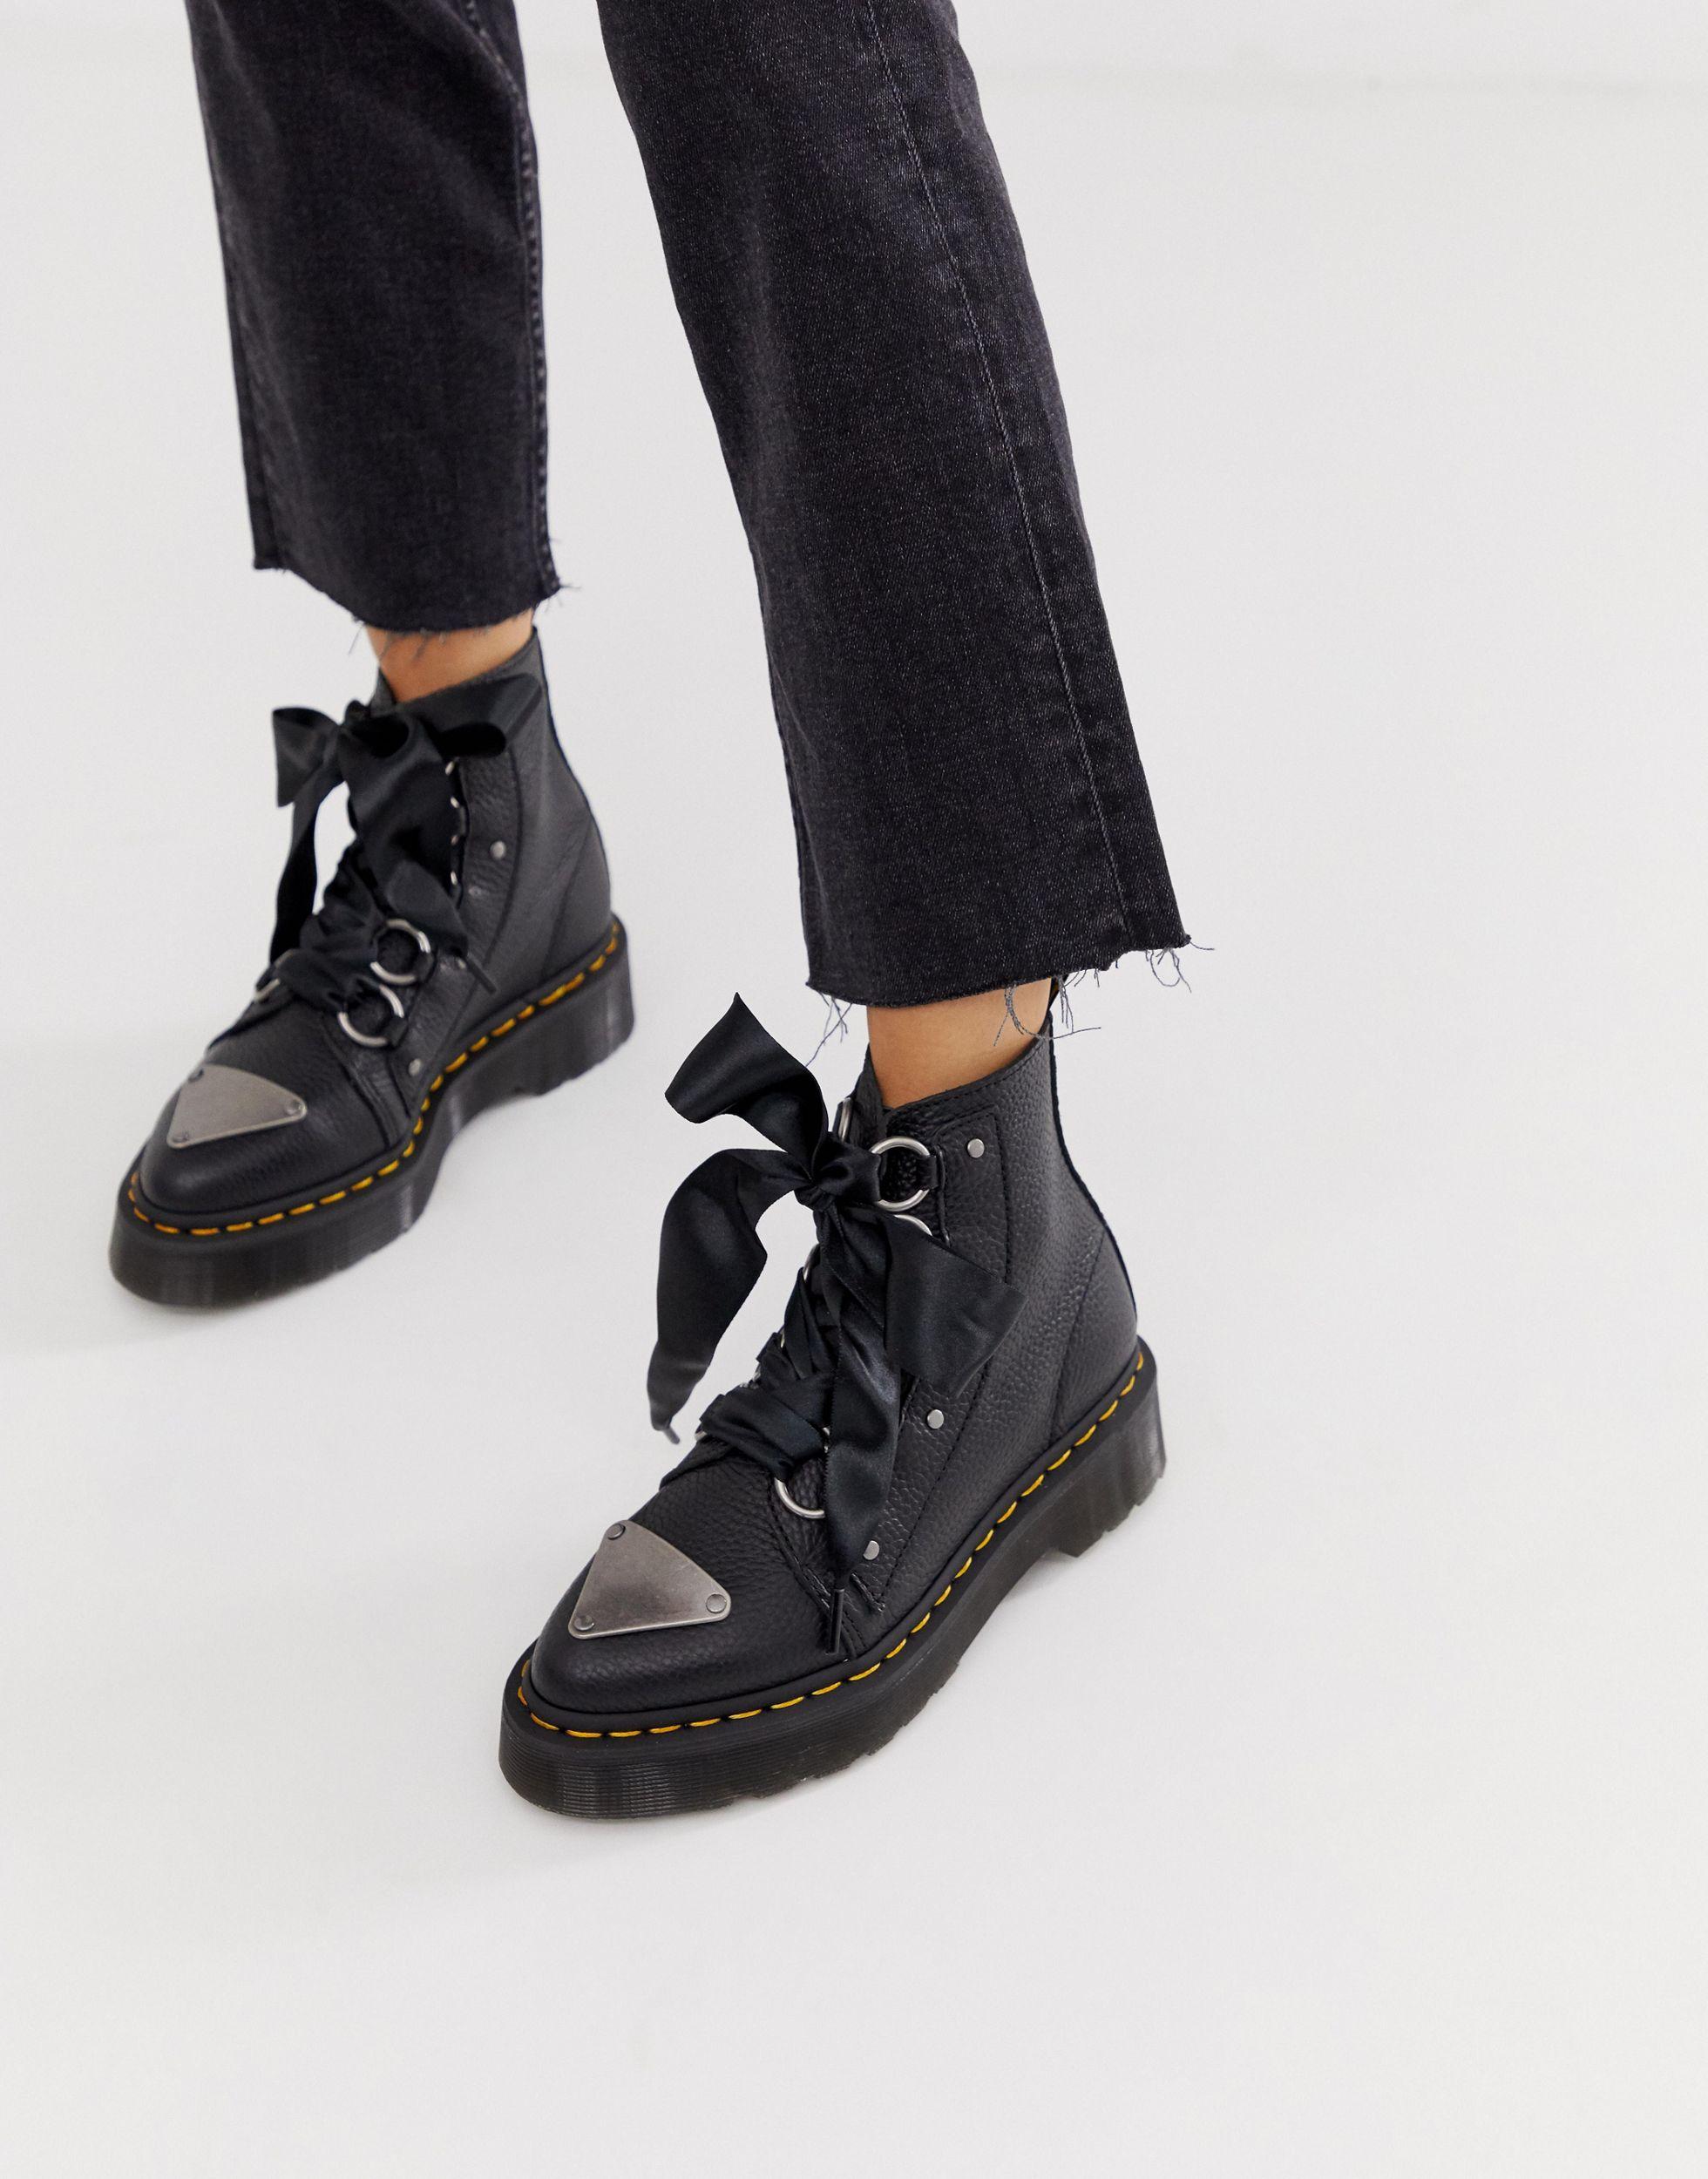 Dr. Martens Farylle Ribbon Lace Chunky Leather Boots in Black - Lyst